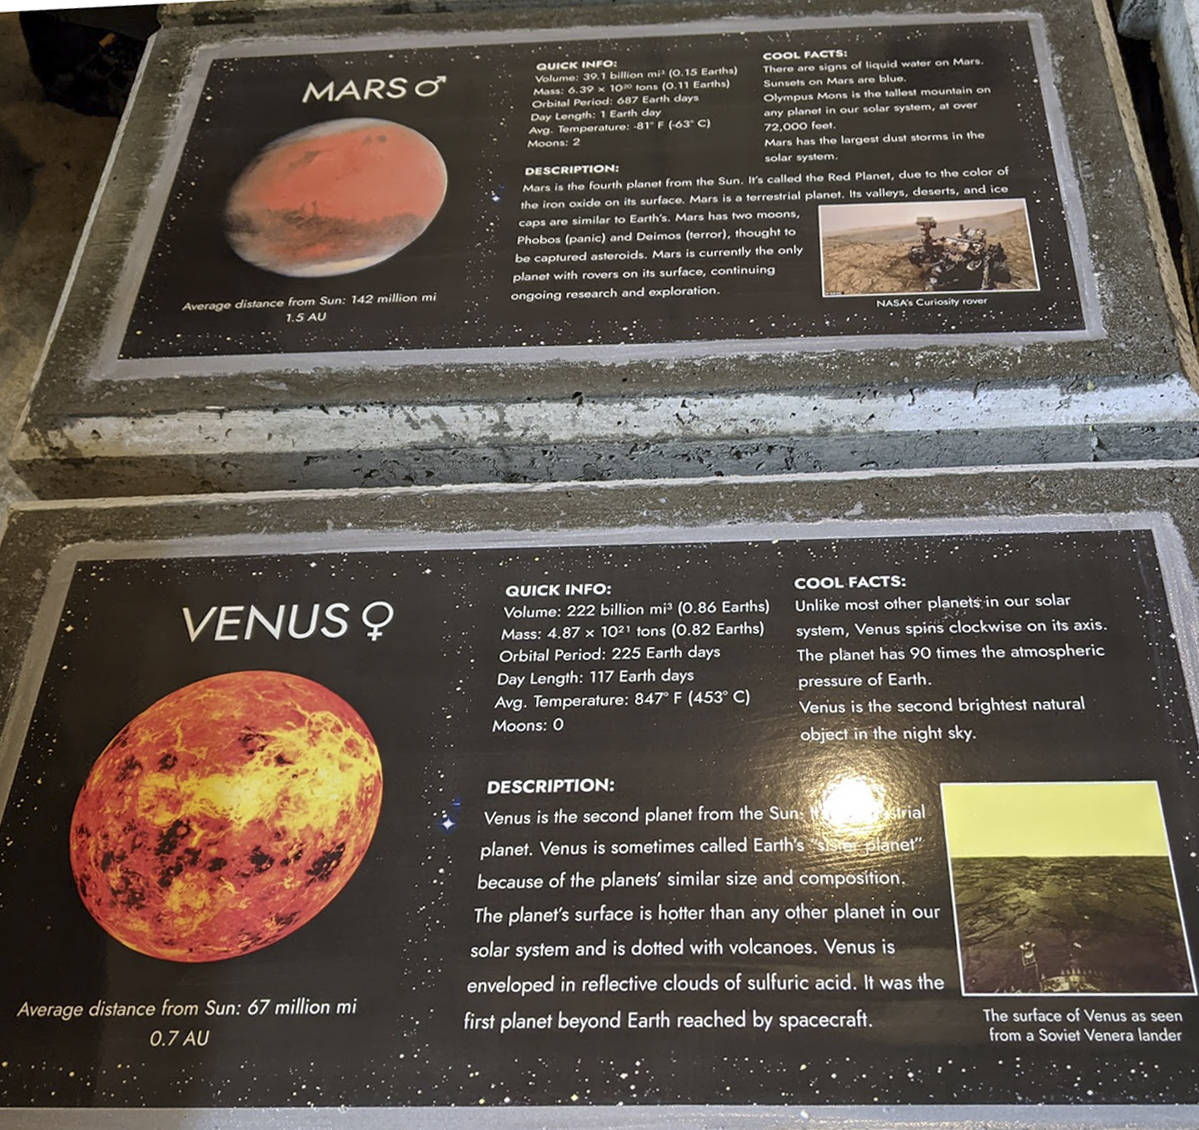 This plaque shows information about Venus, and another about Mars.